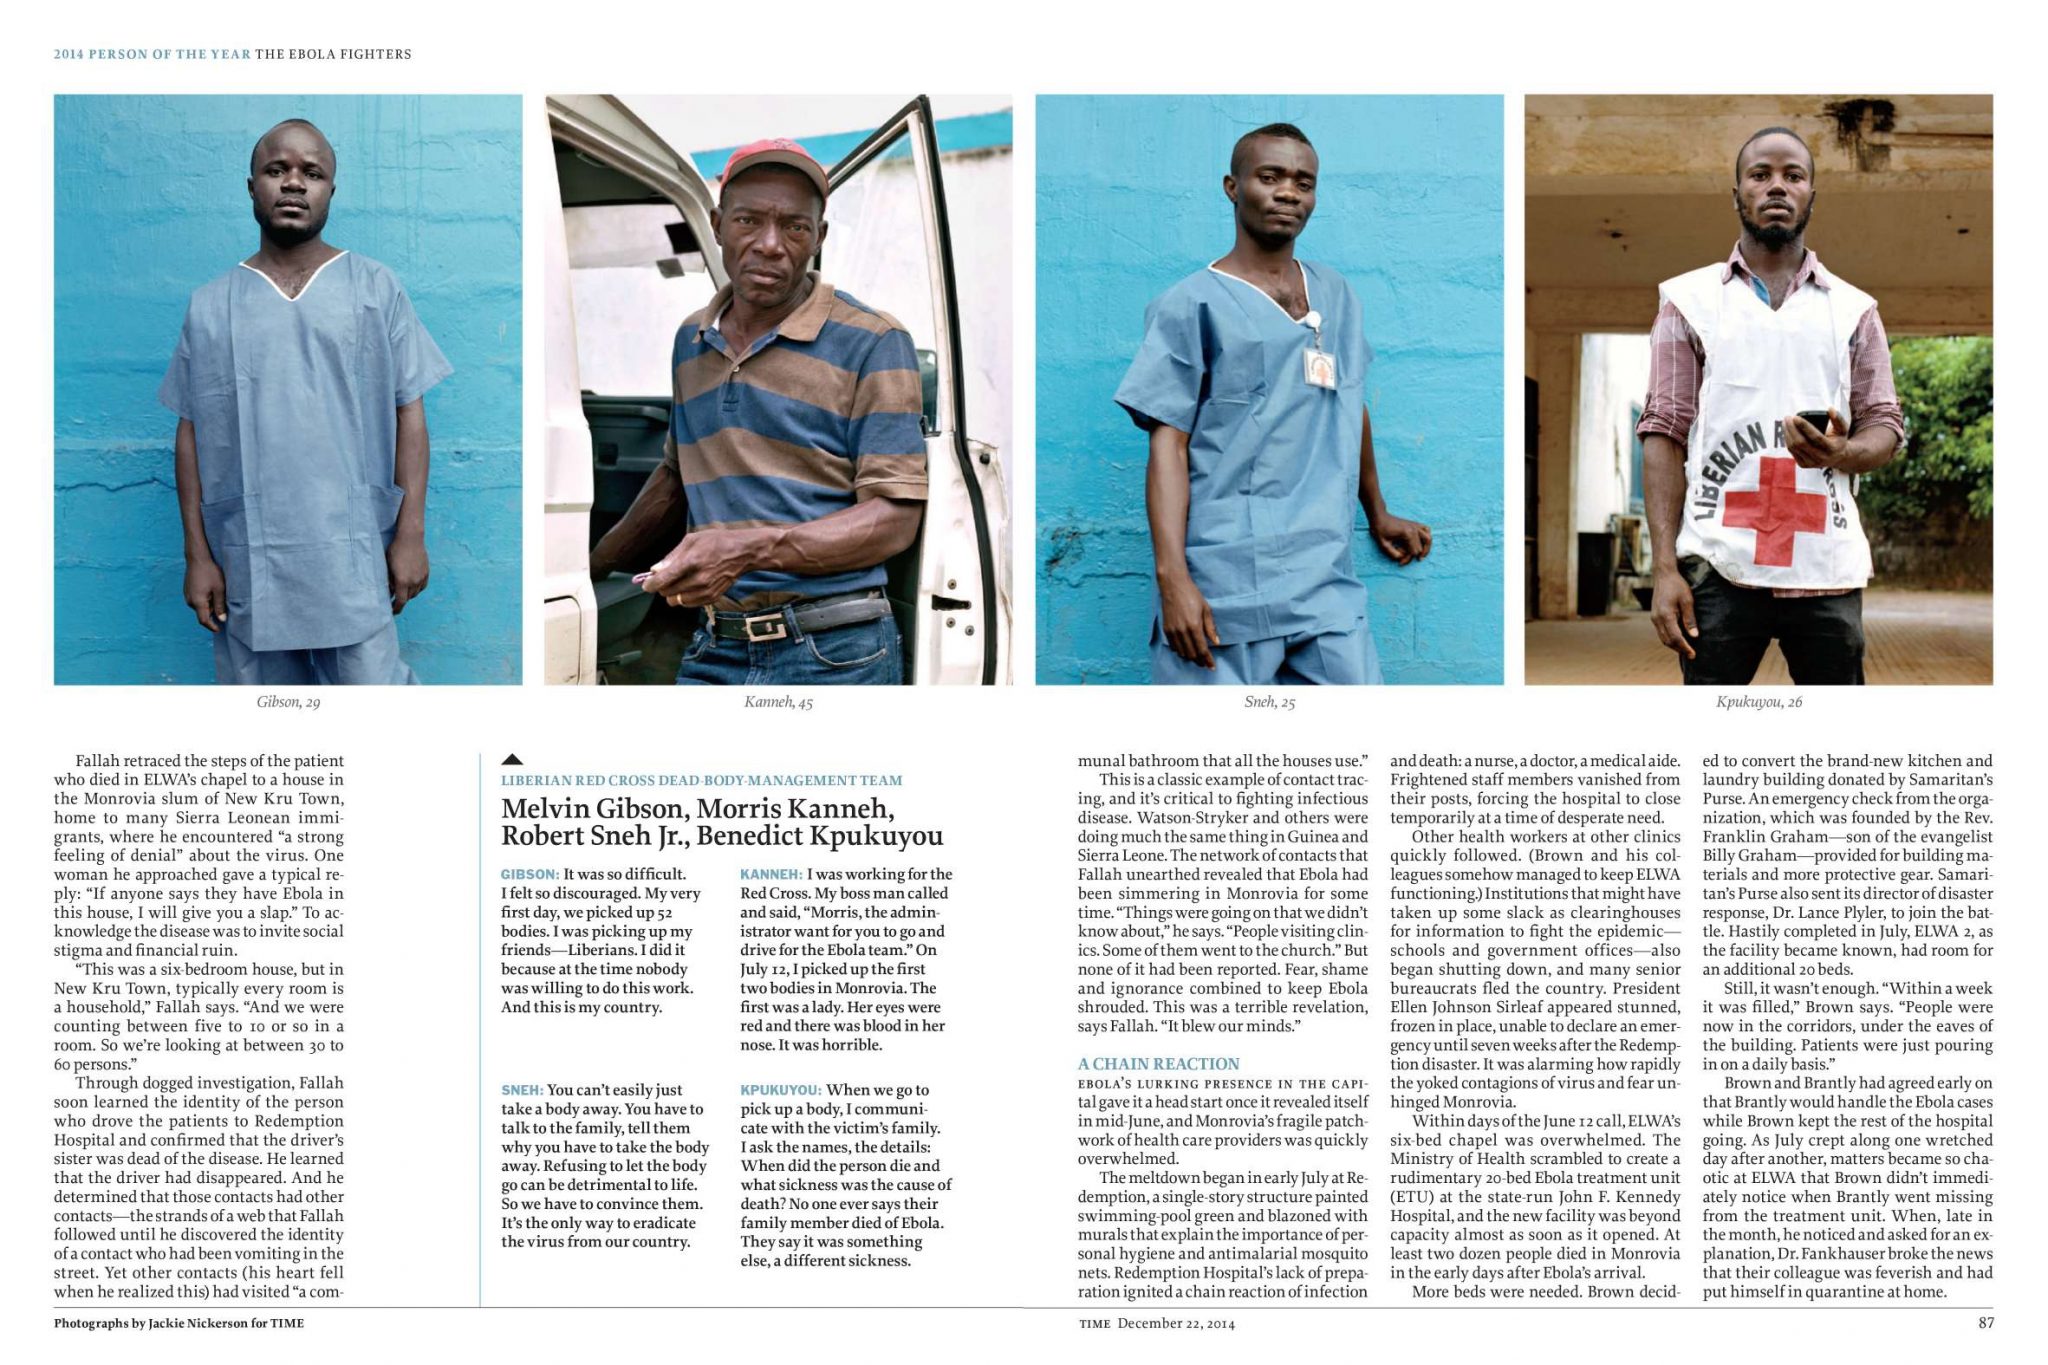  | Time Magazine: The Ebola Fighters | 6